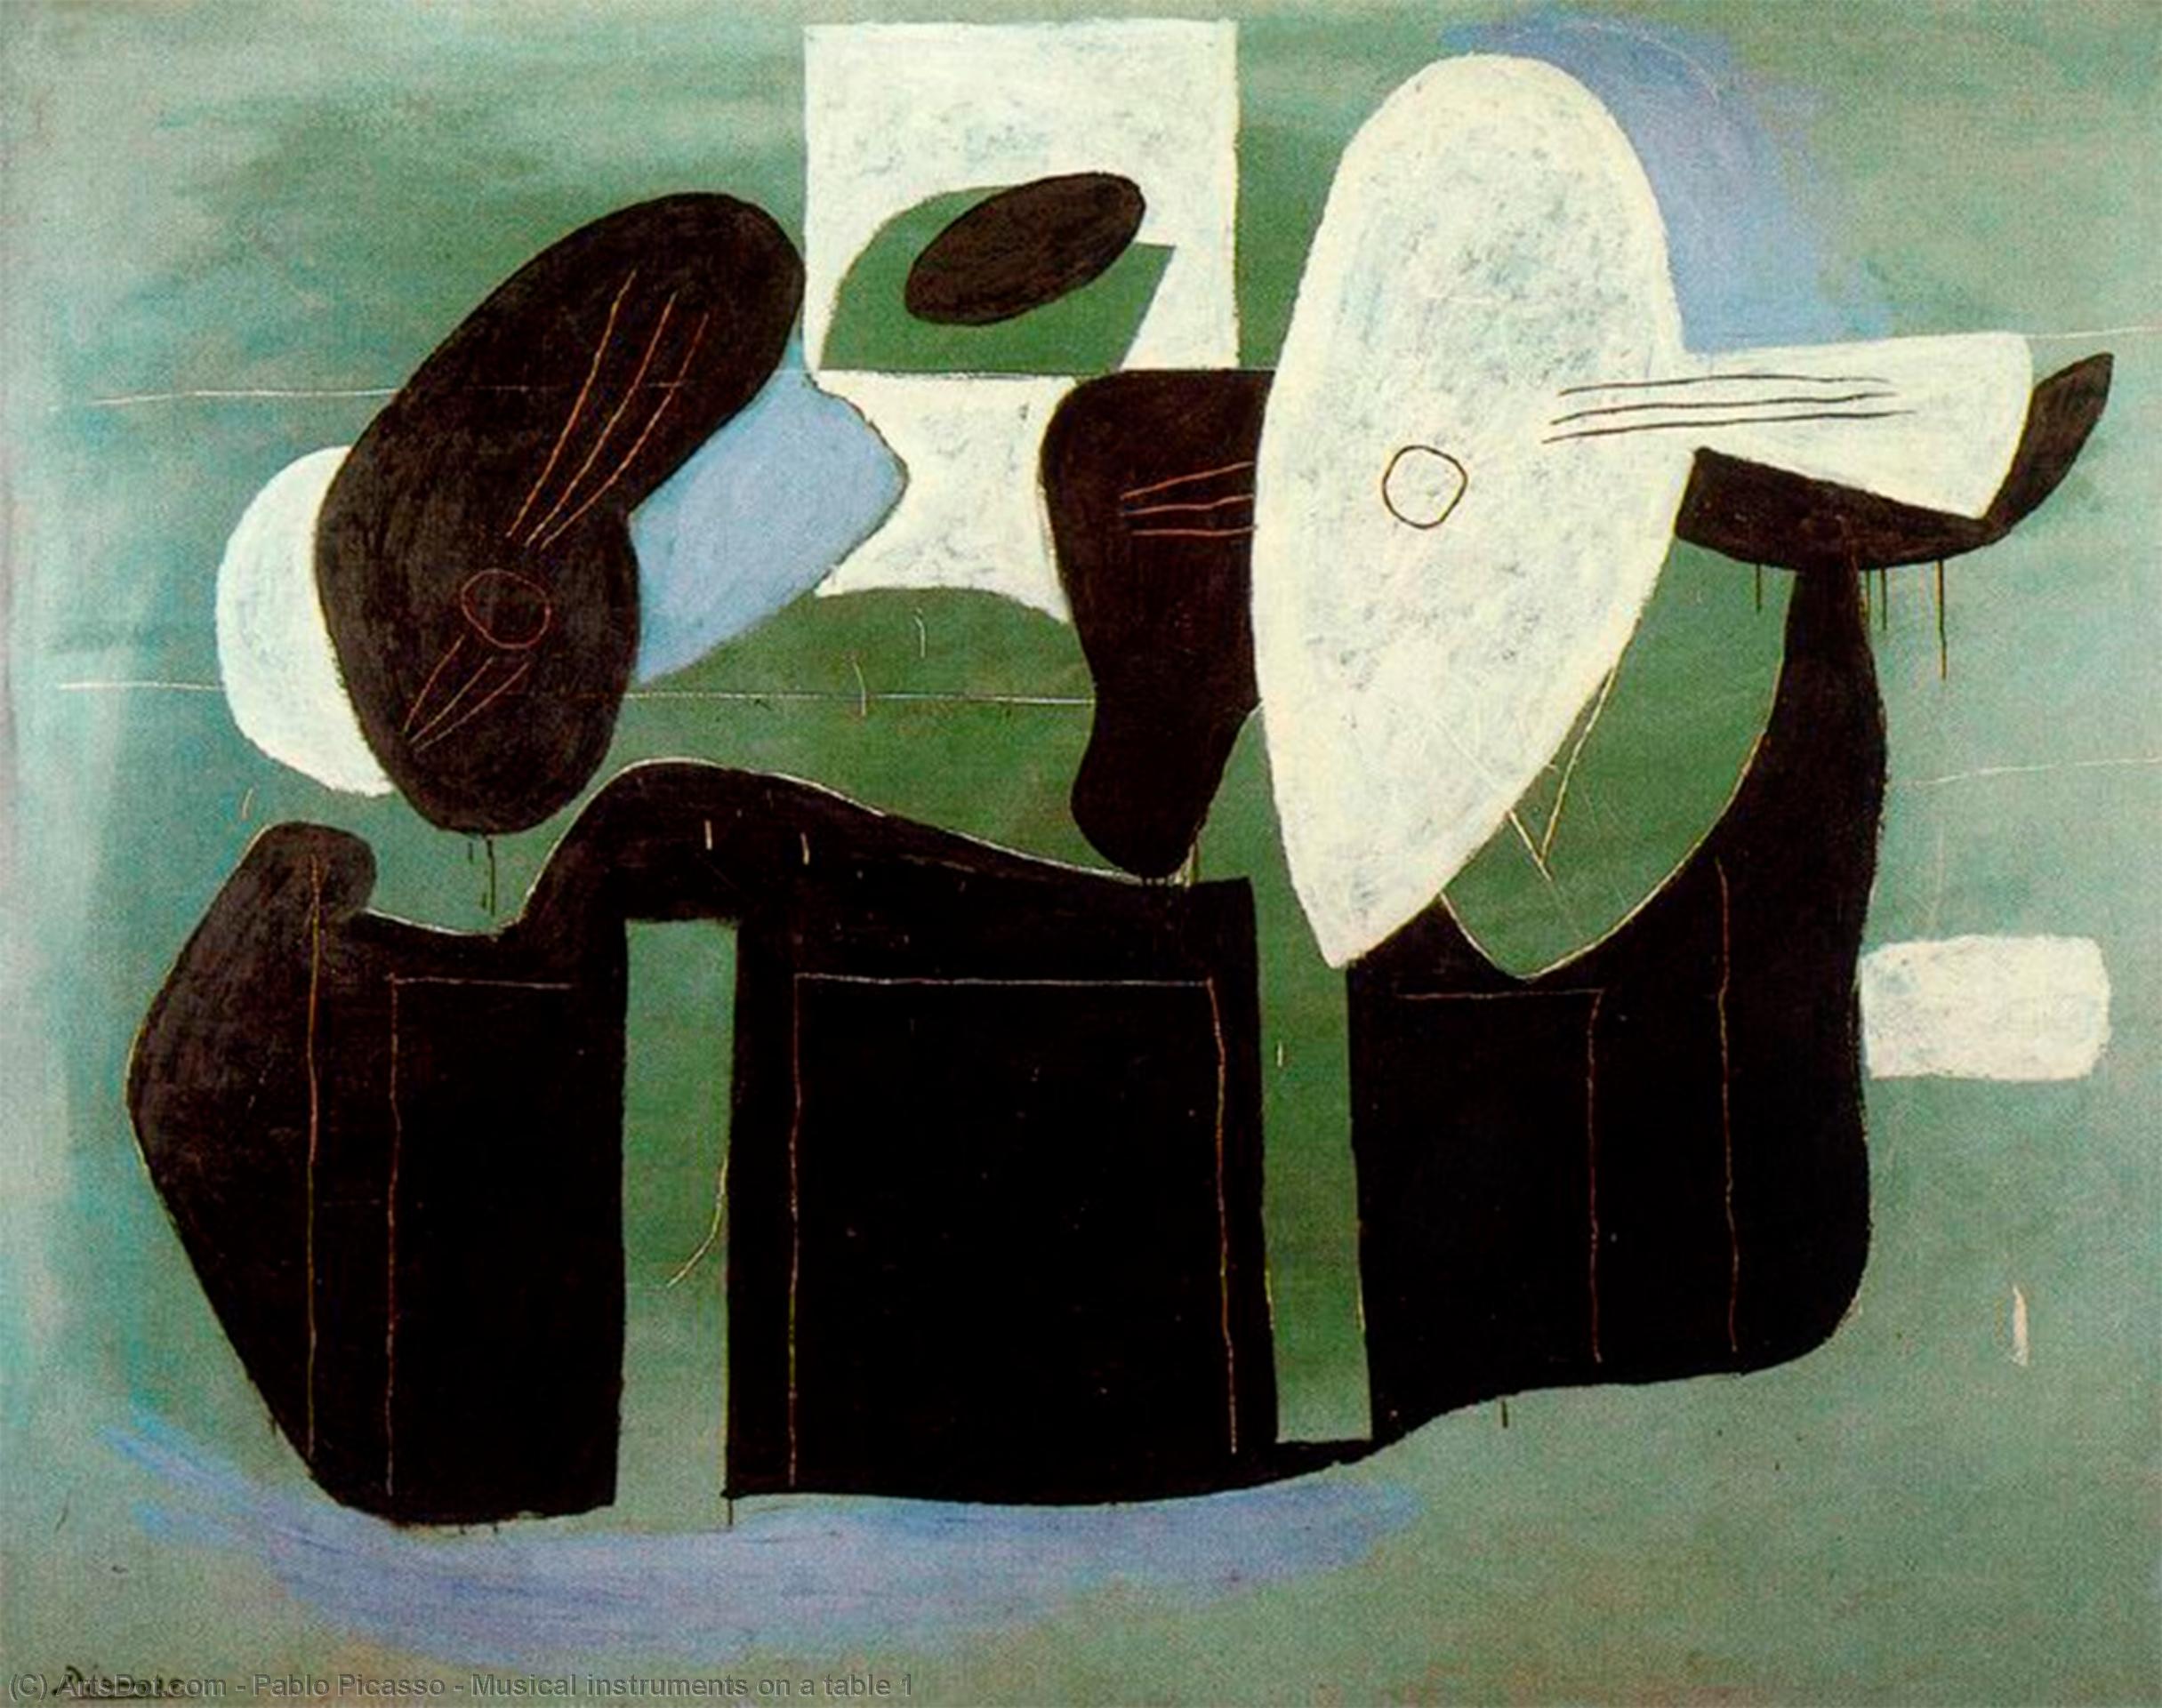 WikiOO.org - 백과 사전 - 회화, 삽화 Pablo Picasso - Musical instruments on a table 1